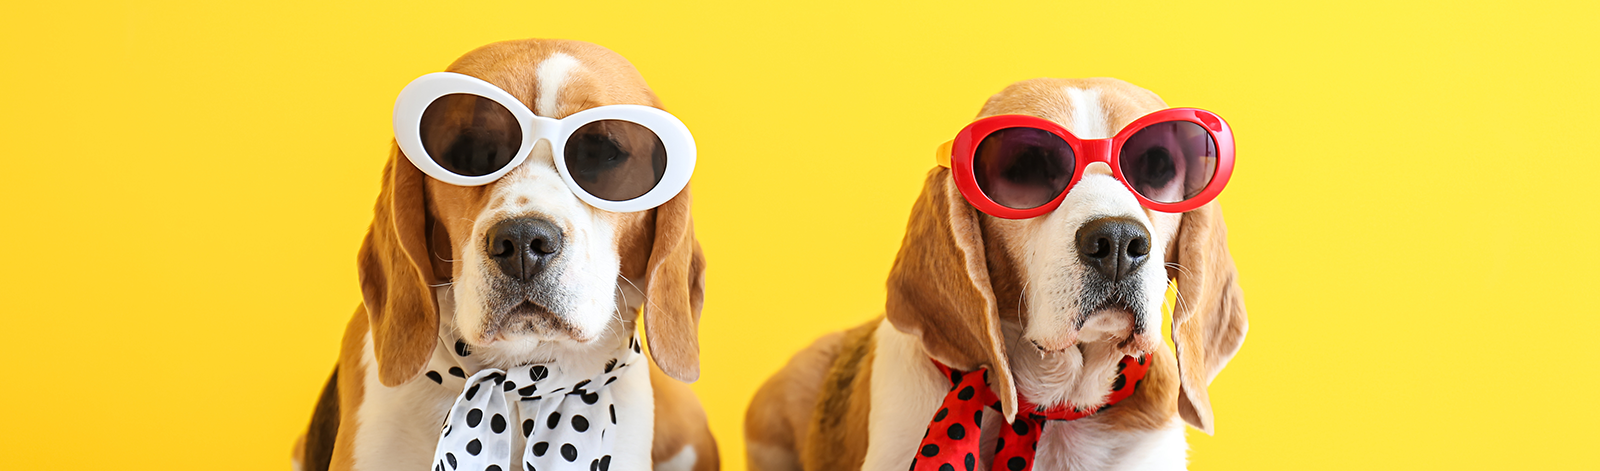 Two dogs wearing sunglasses and scarves